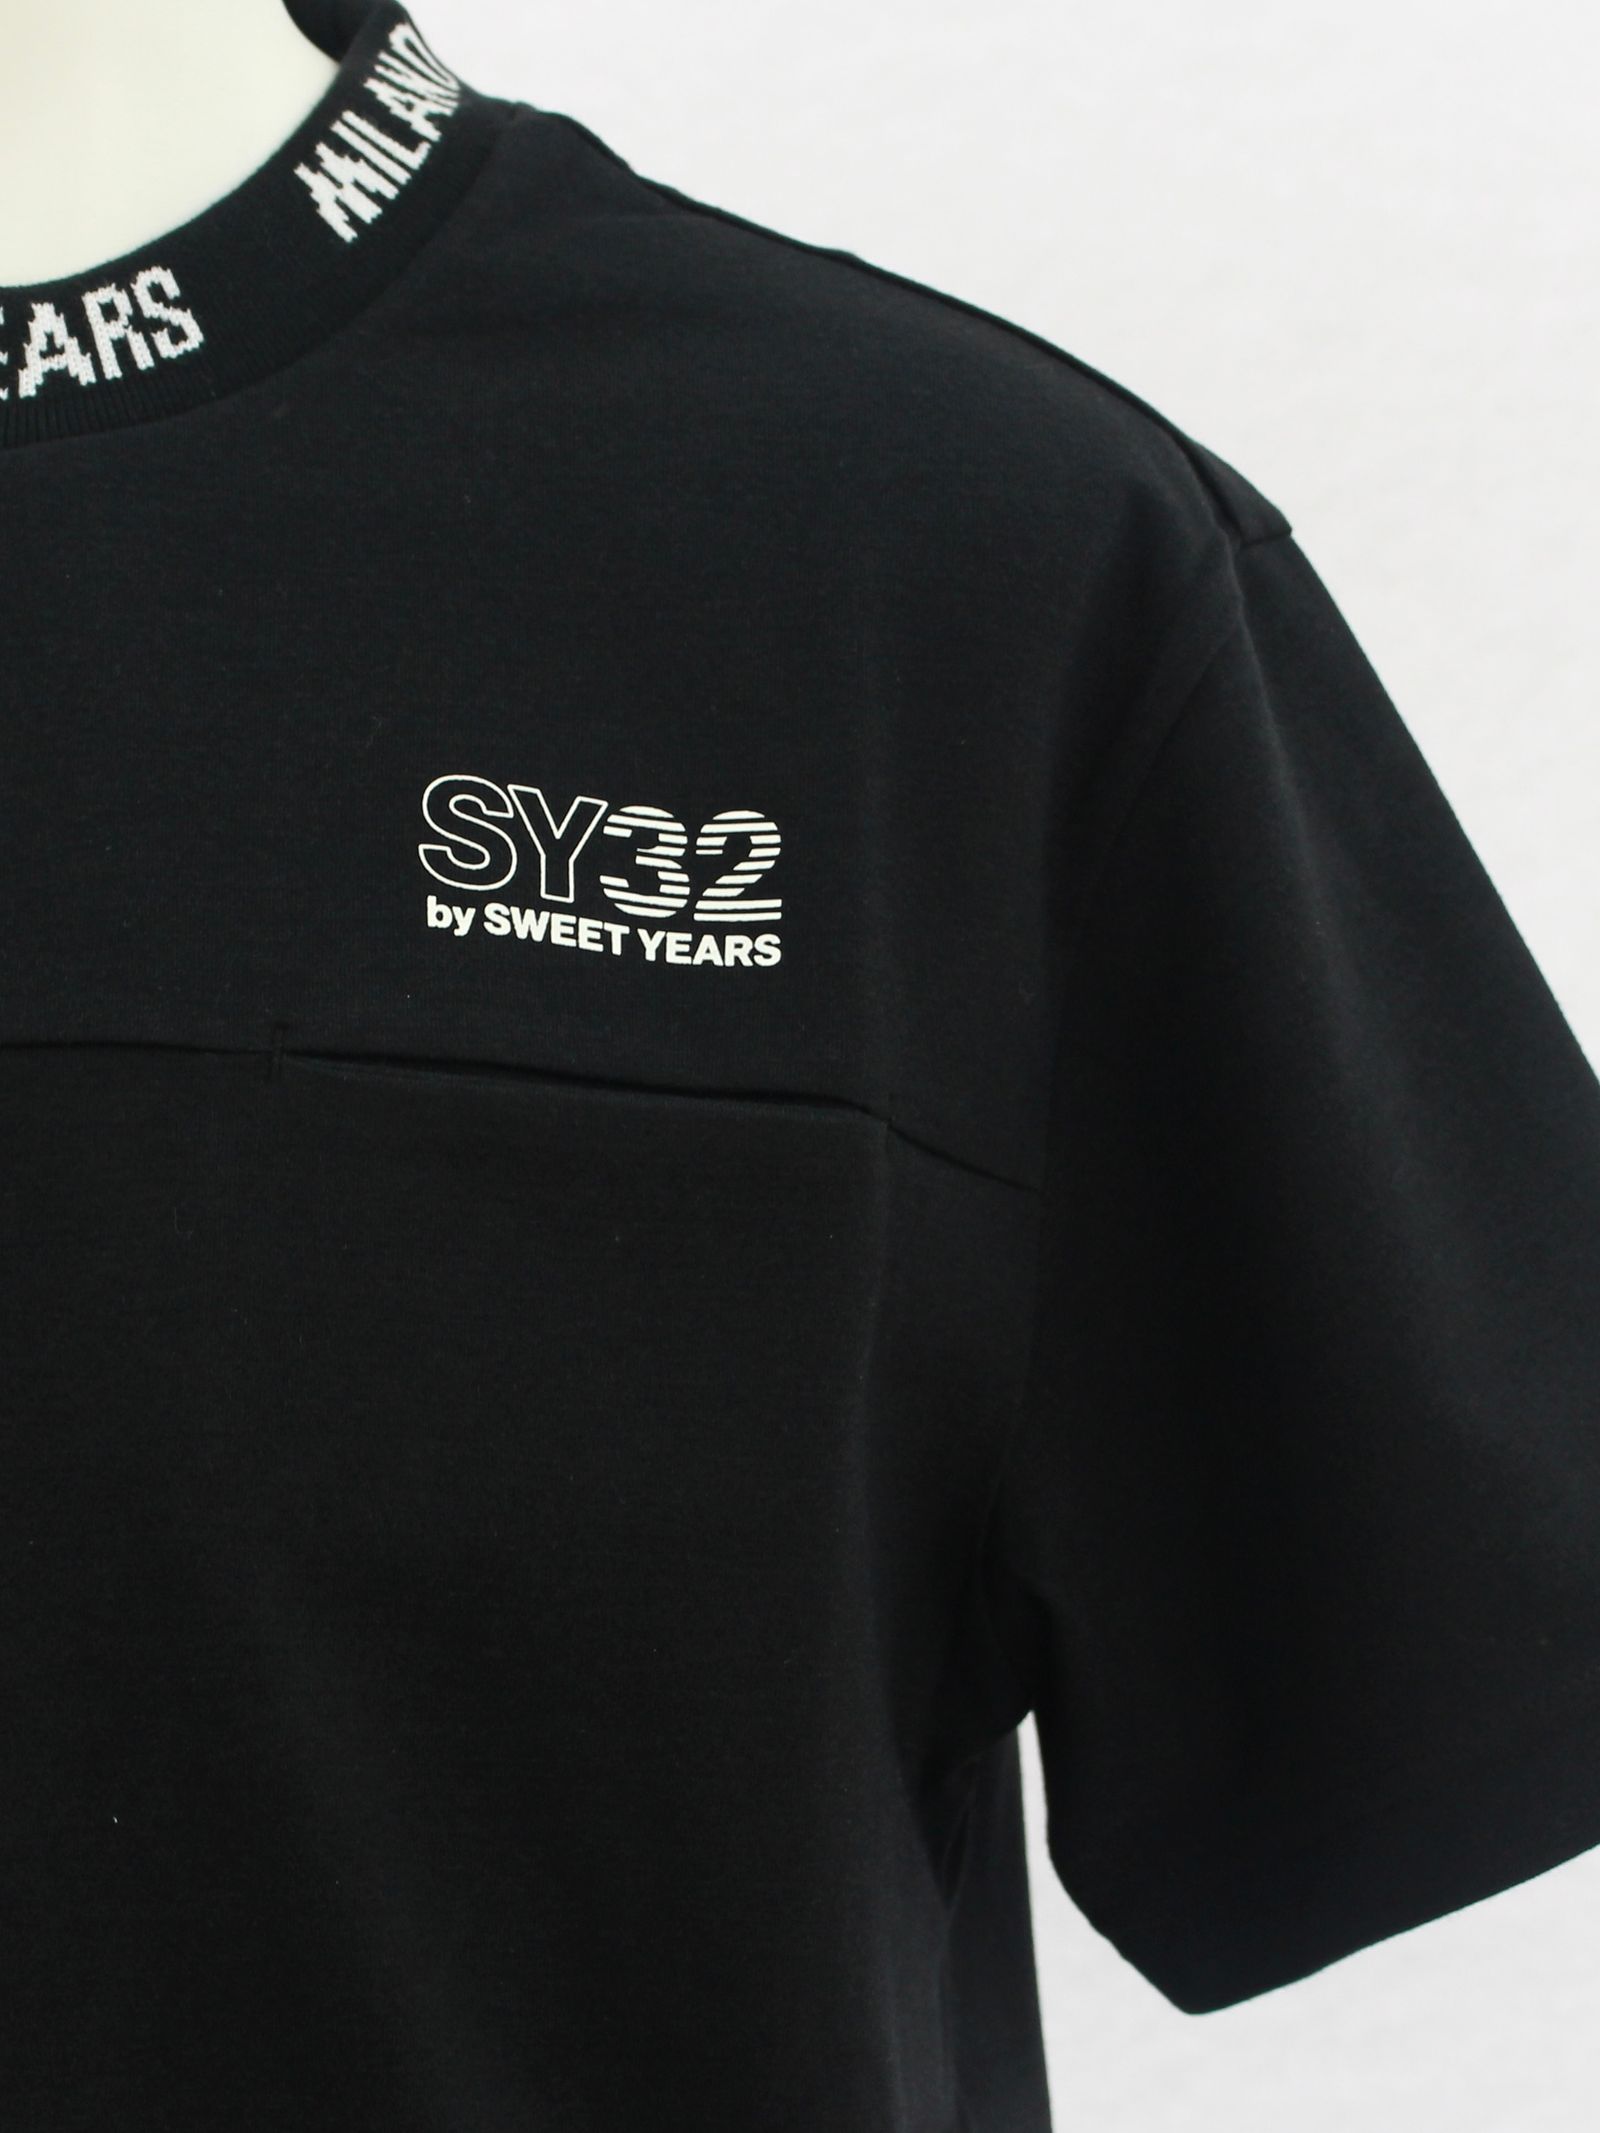 SY32 by SWEET YEARS - ネックロゴ ポケットTシャツ / EXCHANGE POCKET 